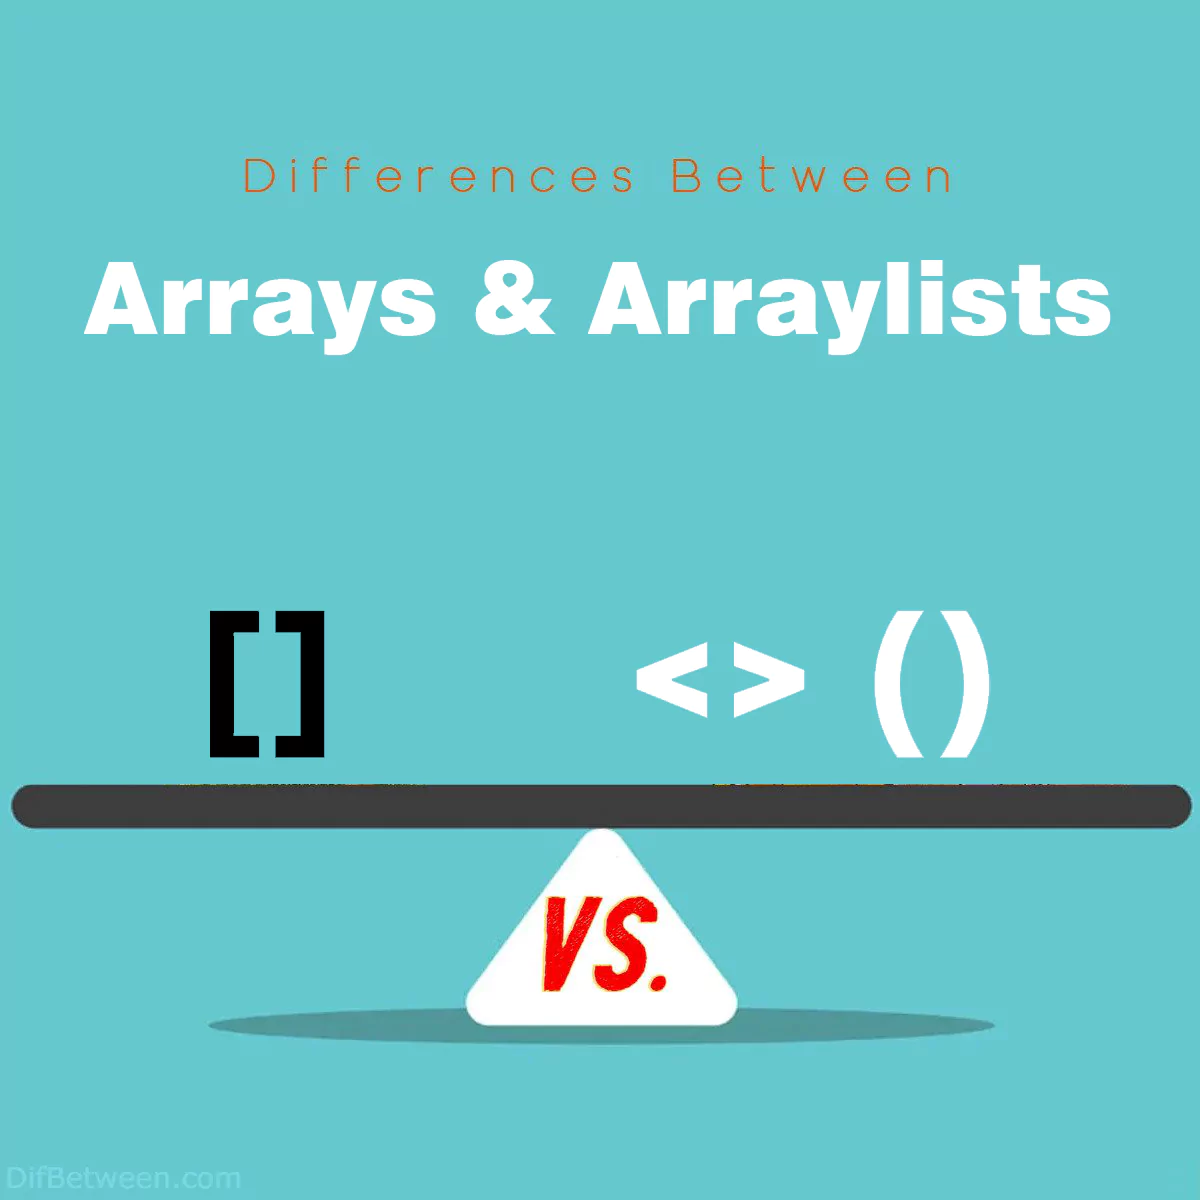 Differences Between Arrays and Arraylists